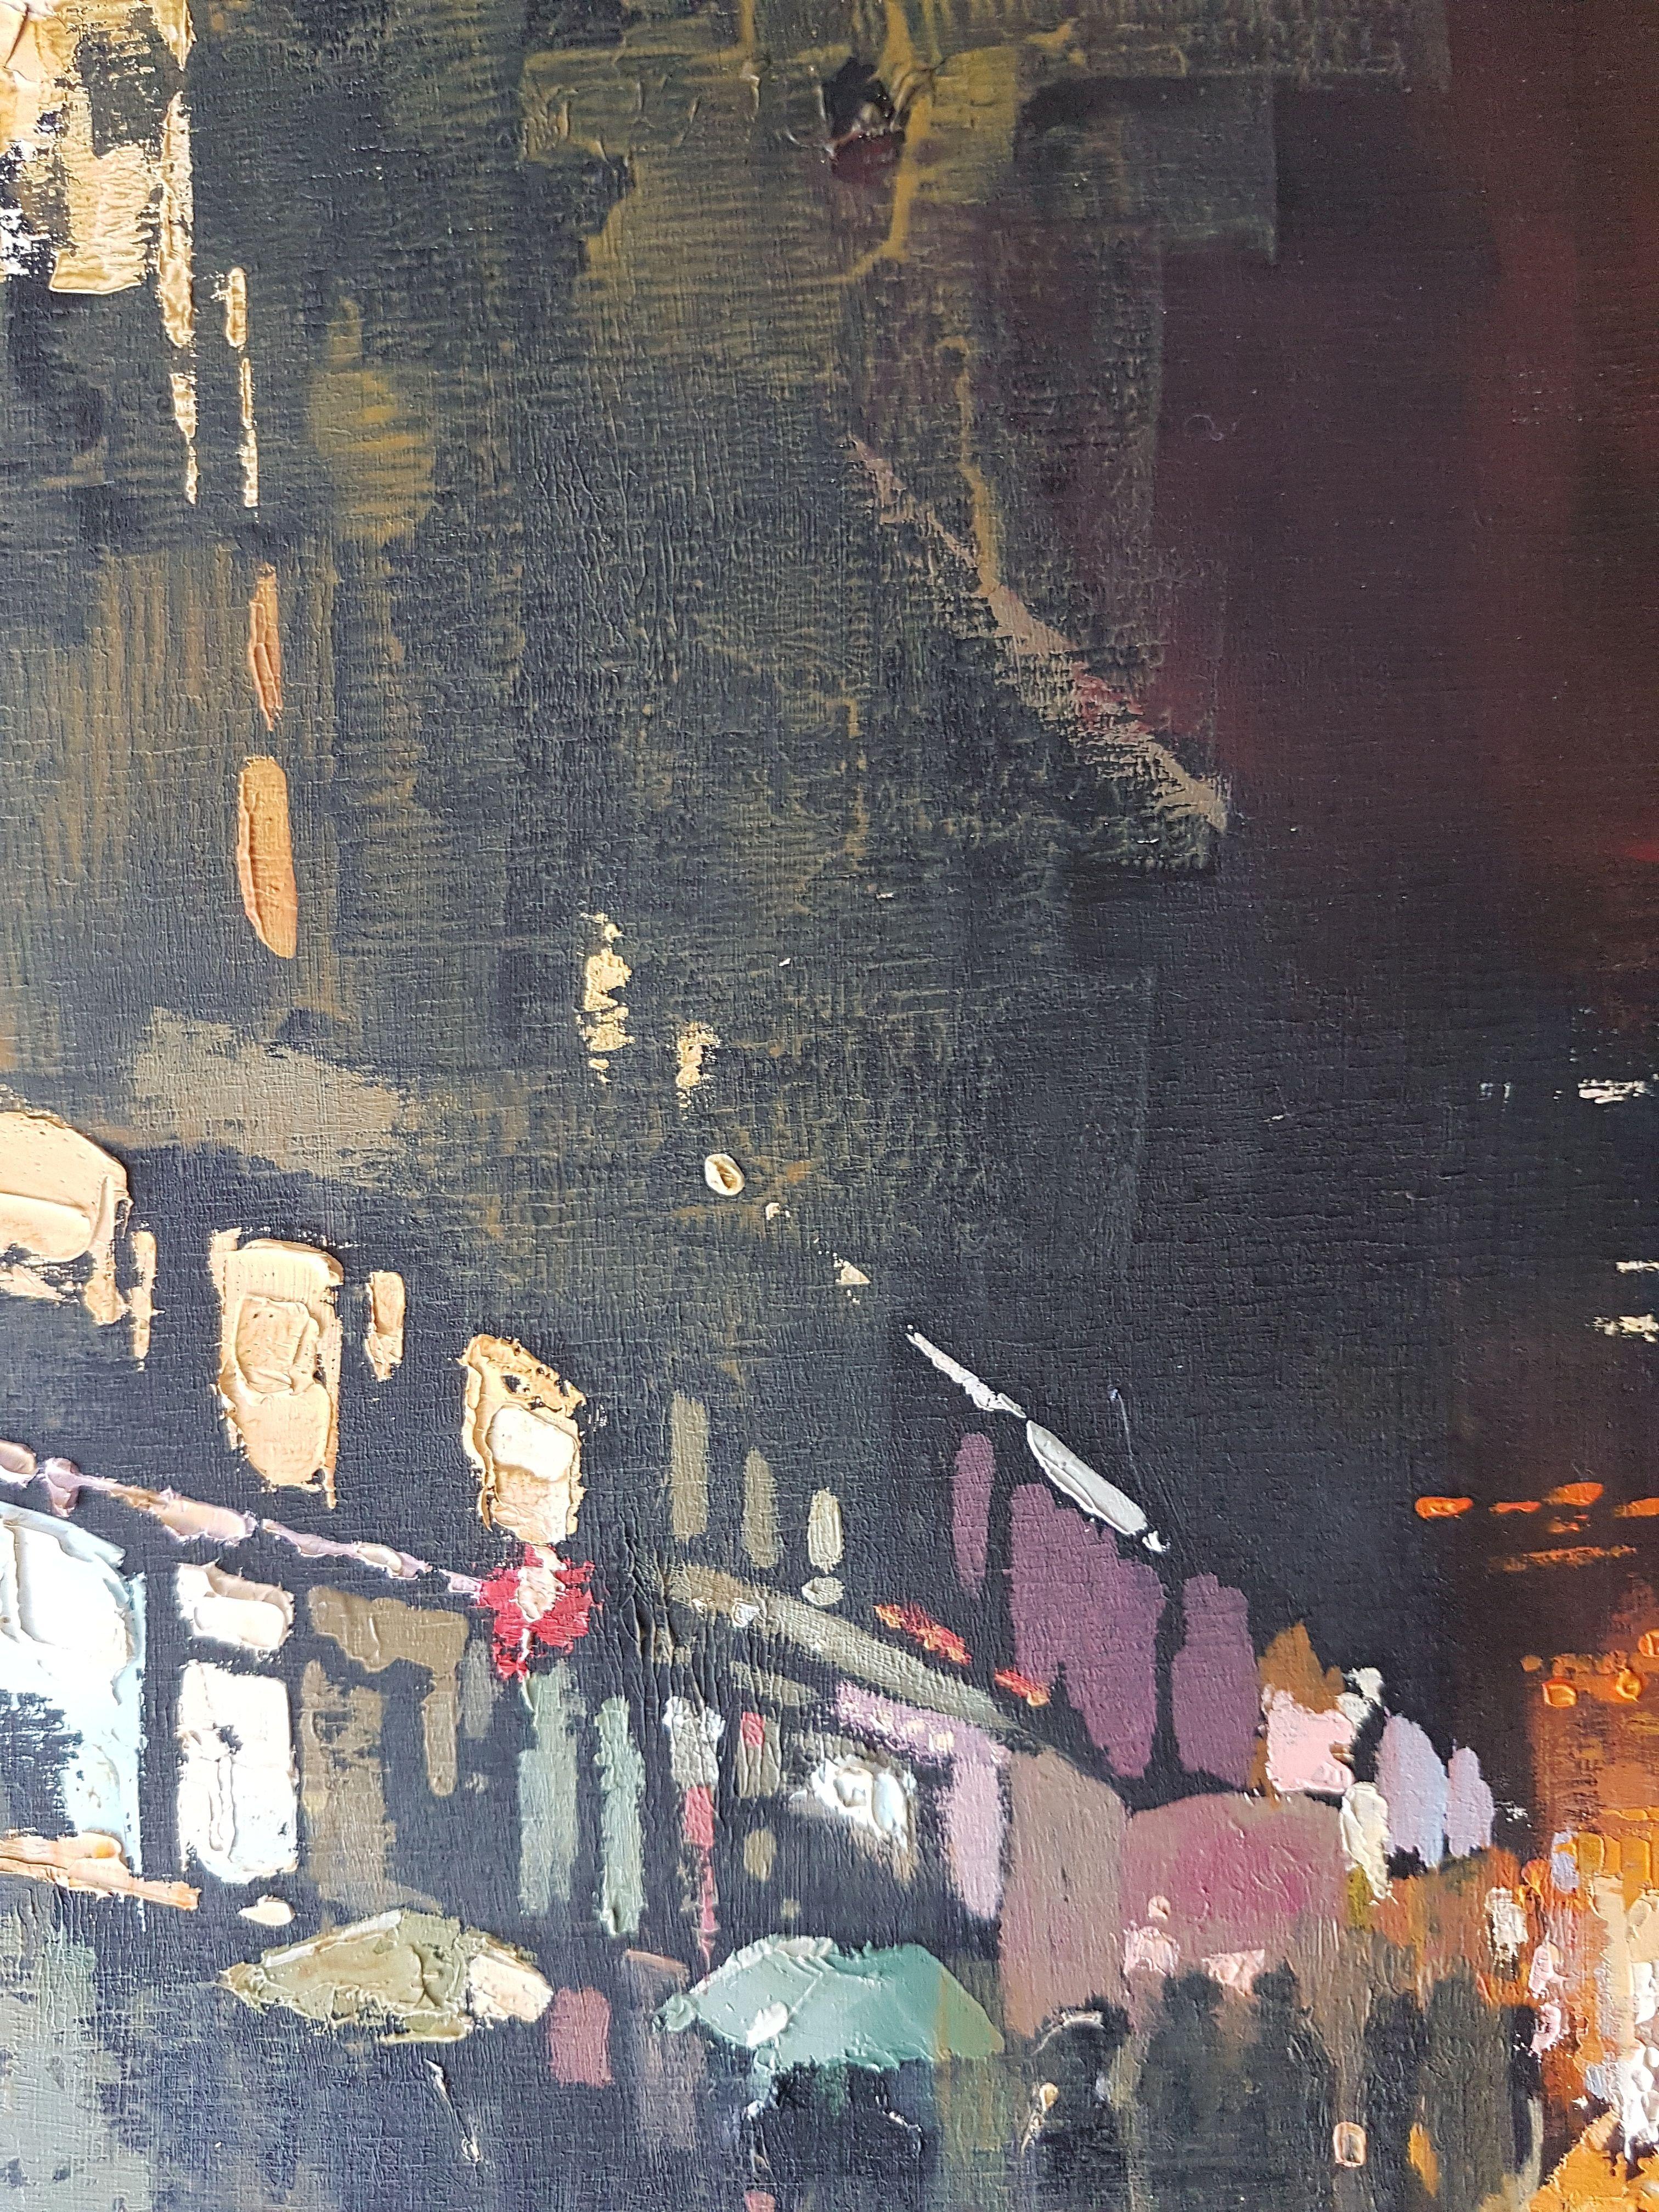 Reflections Of The Night, Painting, Oil on MDF Panel 2